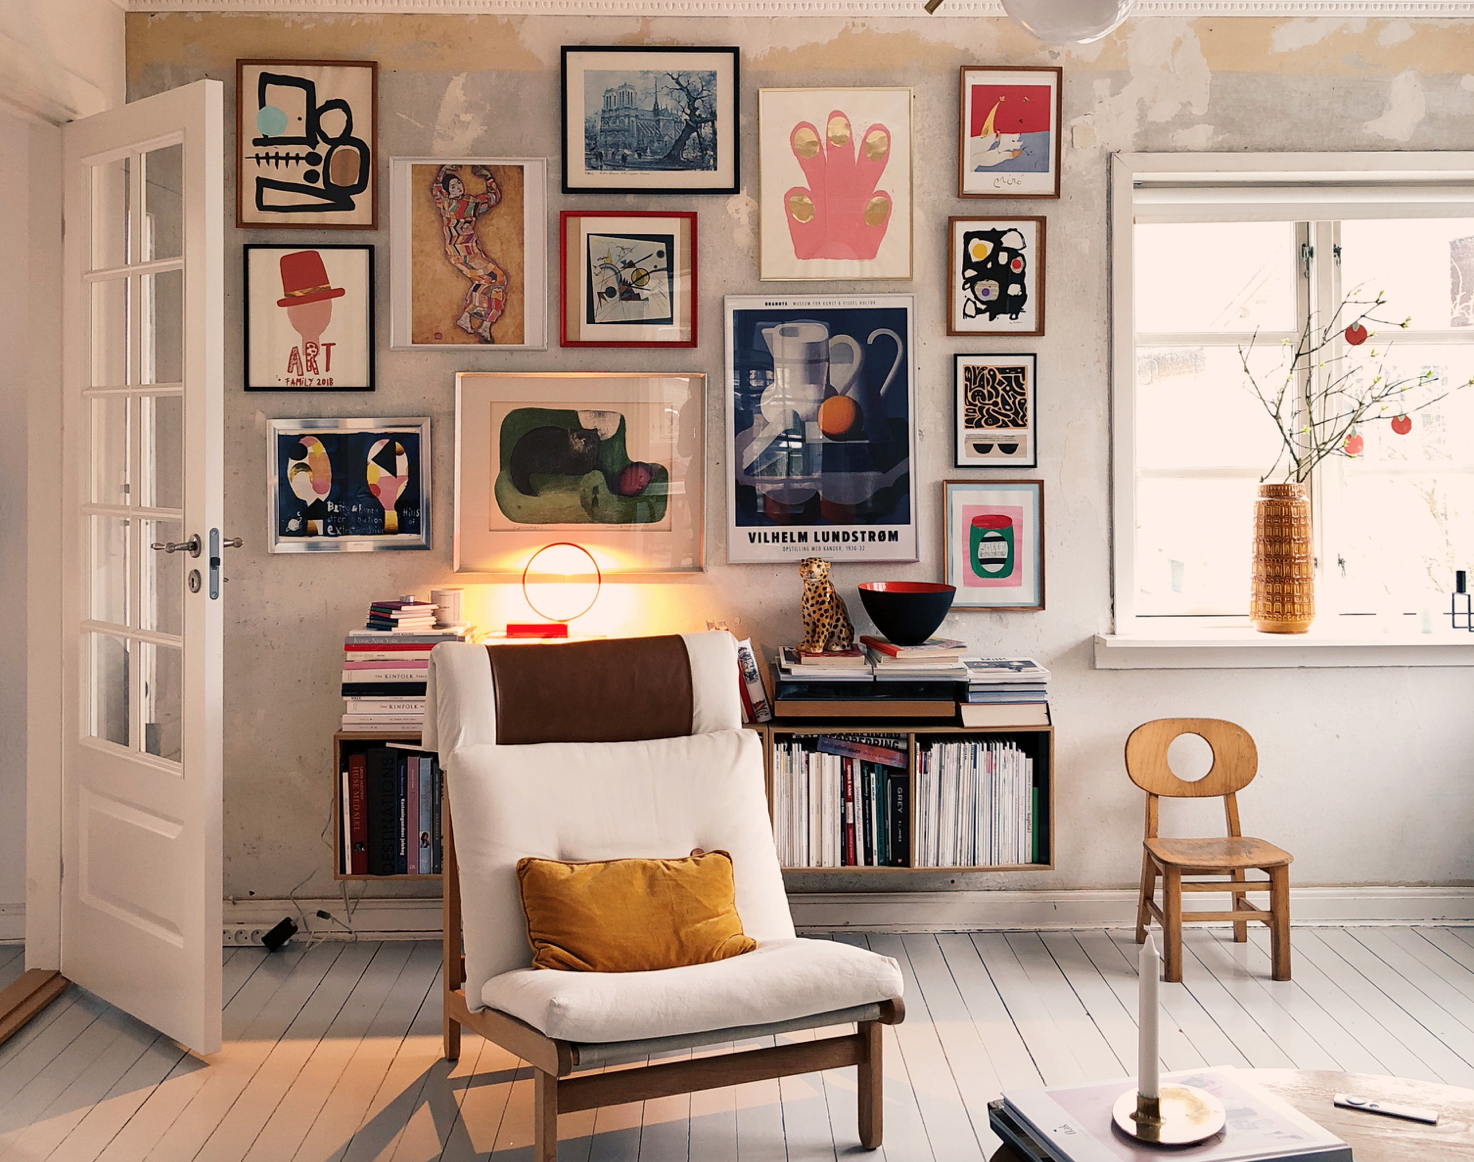 gallery wall layout with measurements